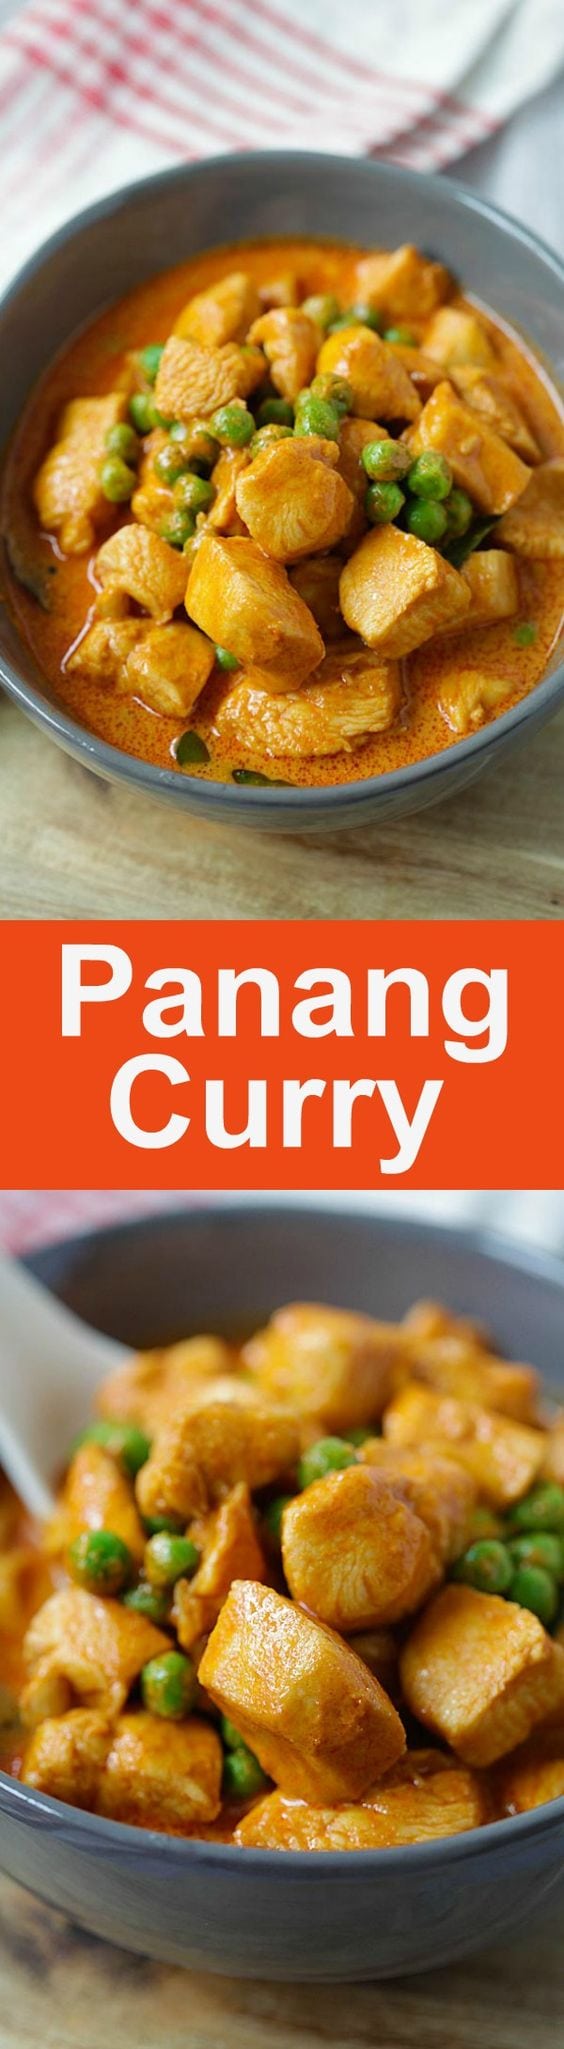 Panang Curry - Thai Panang curry with chicken and green peas. Easy 20-minutes homemade Panang curry recipe that is better than restaurants | rasamalaysia.com